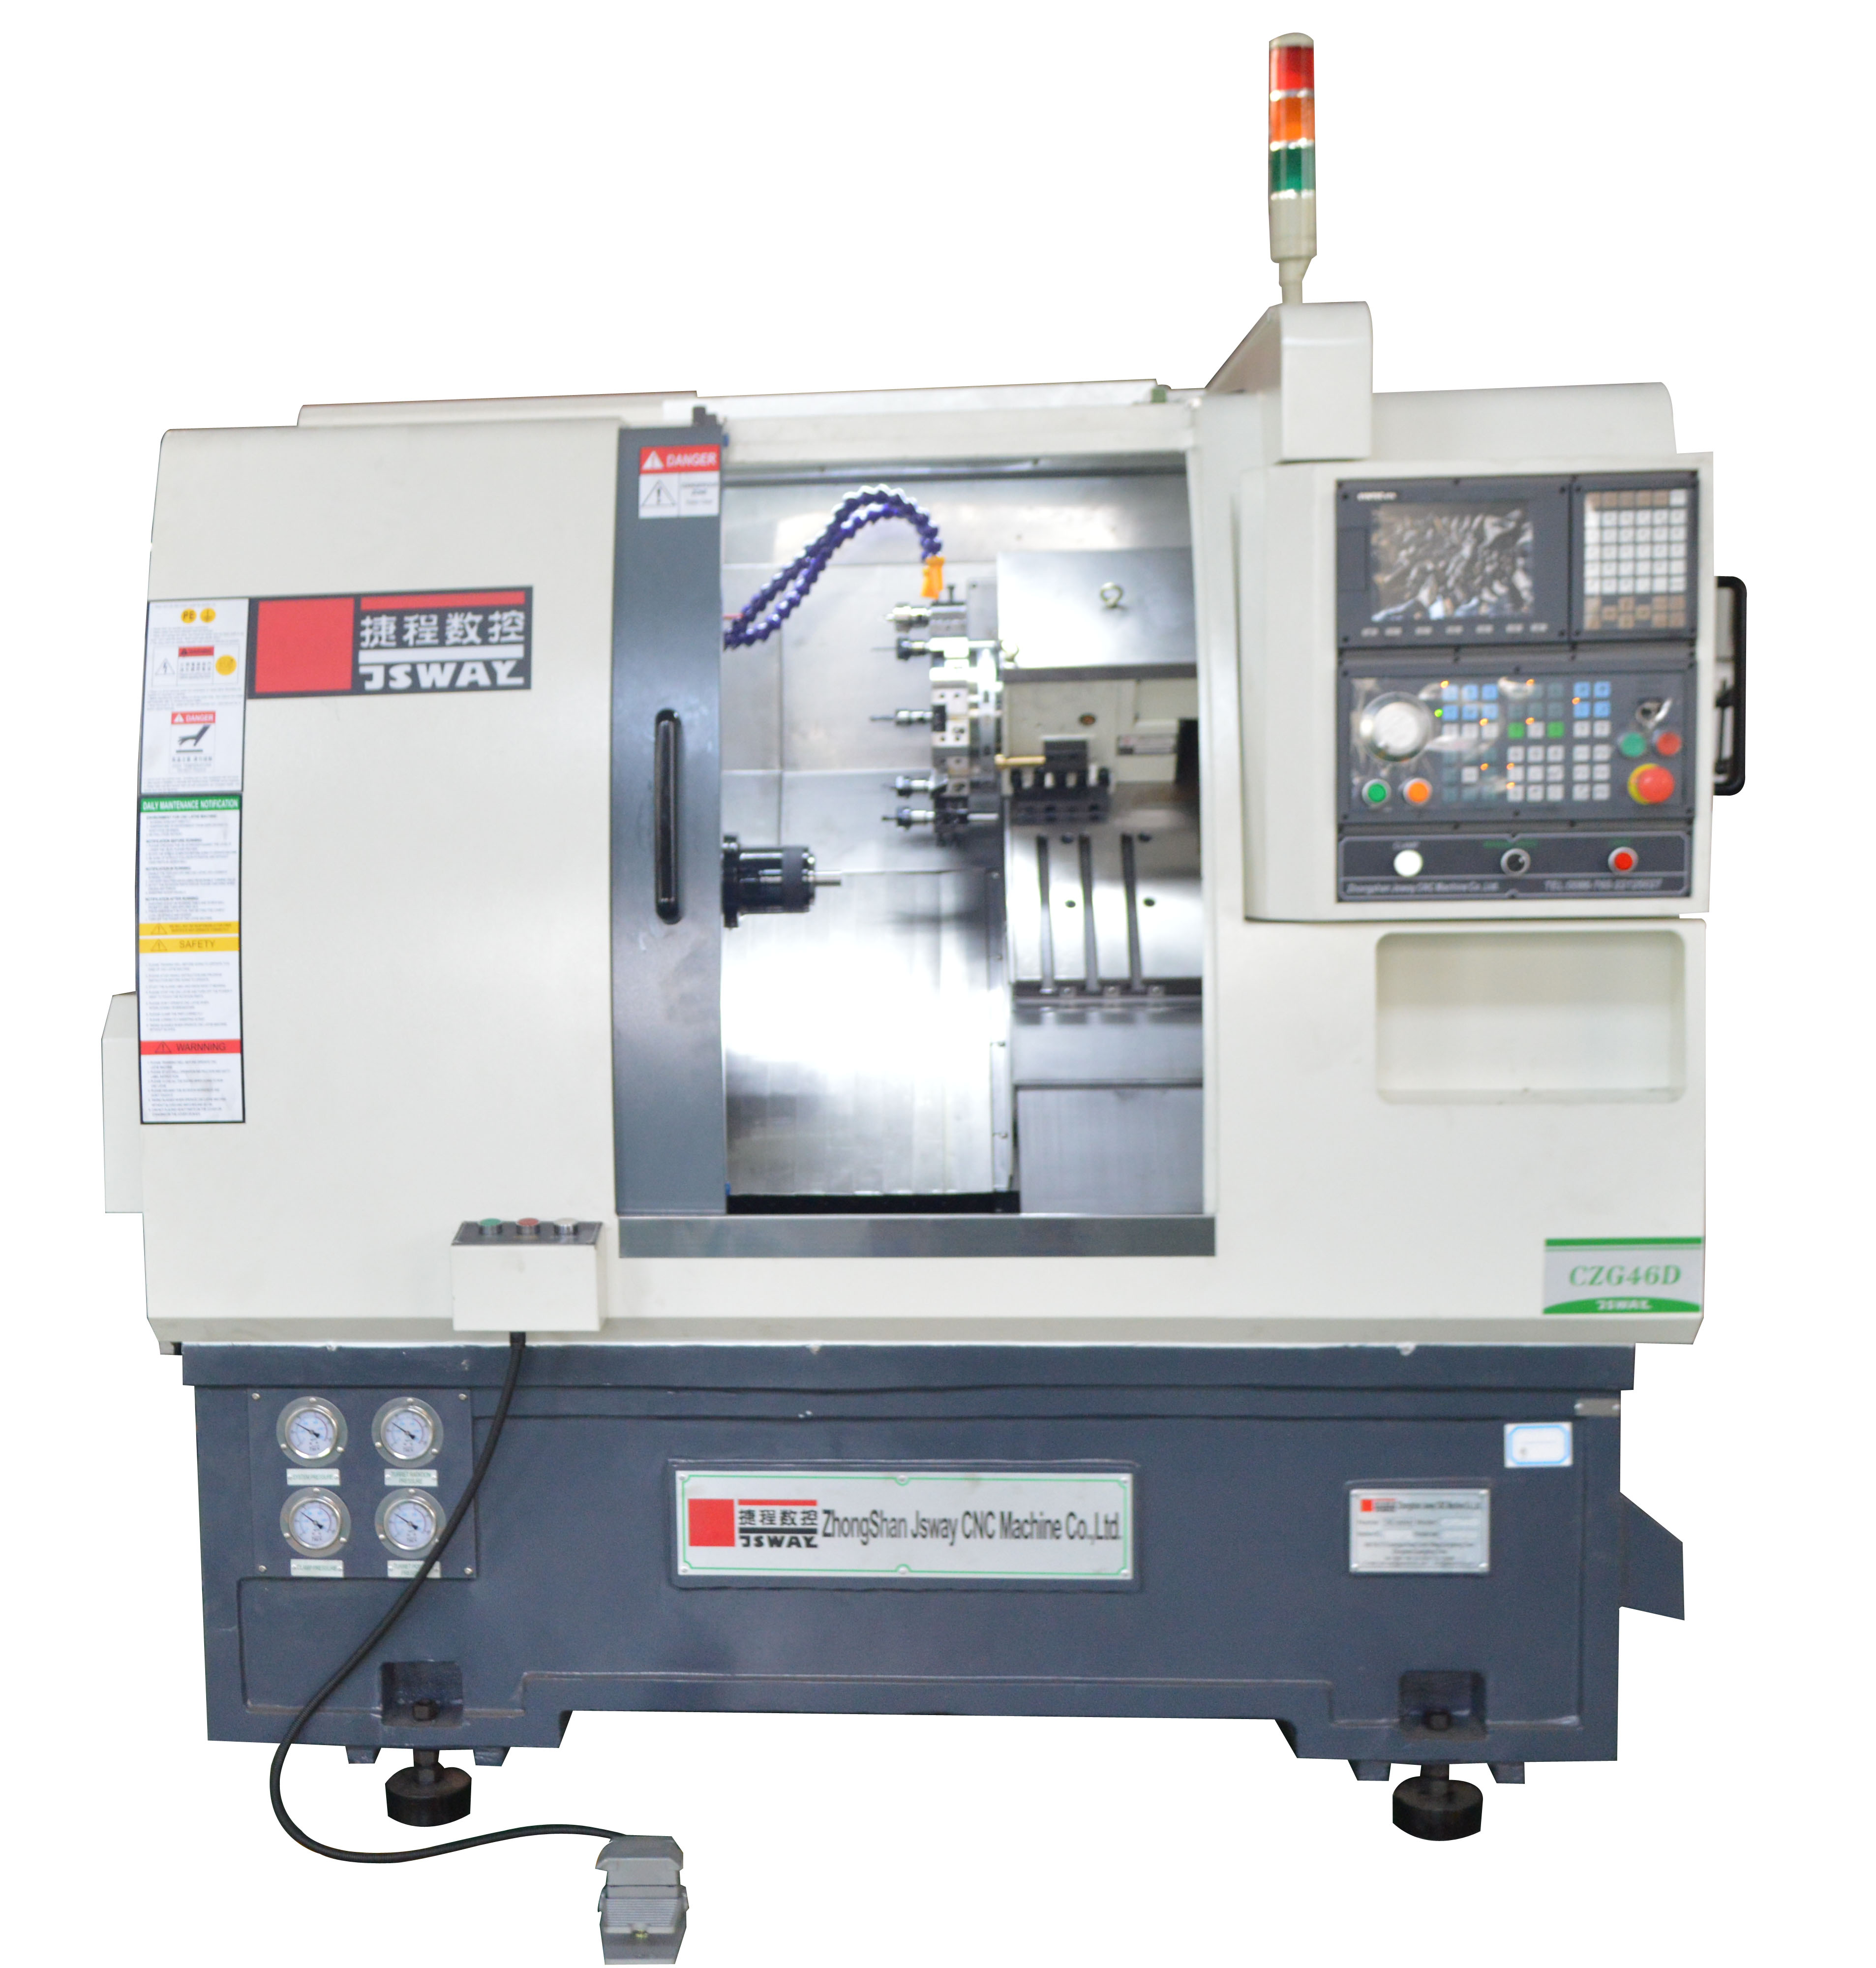 JSWAY lathes cnc mill price on sale for factory